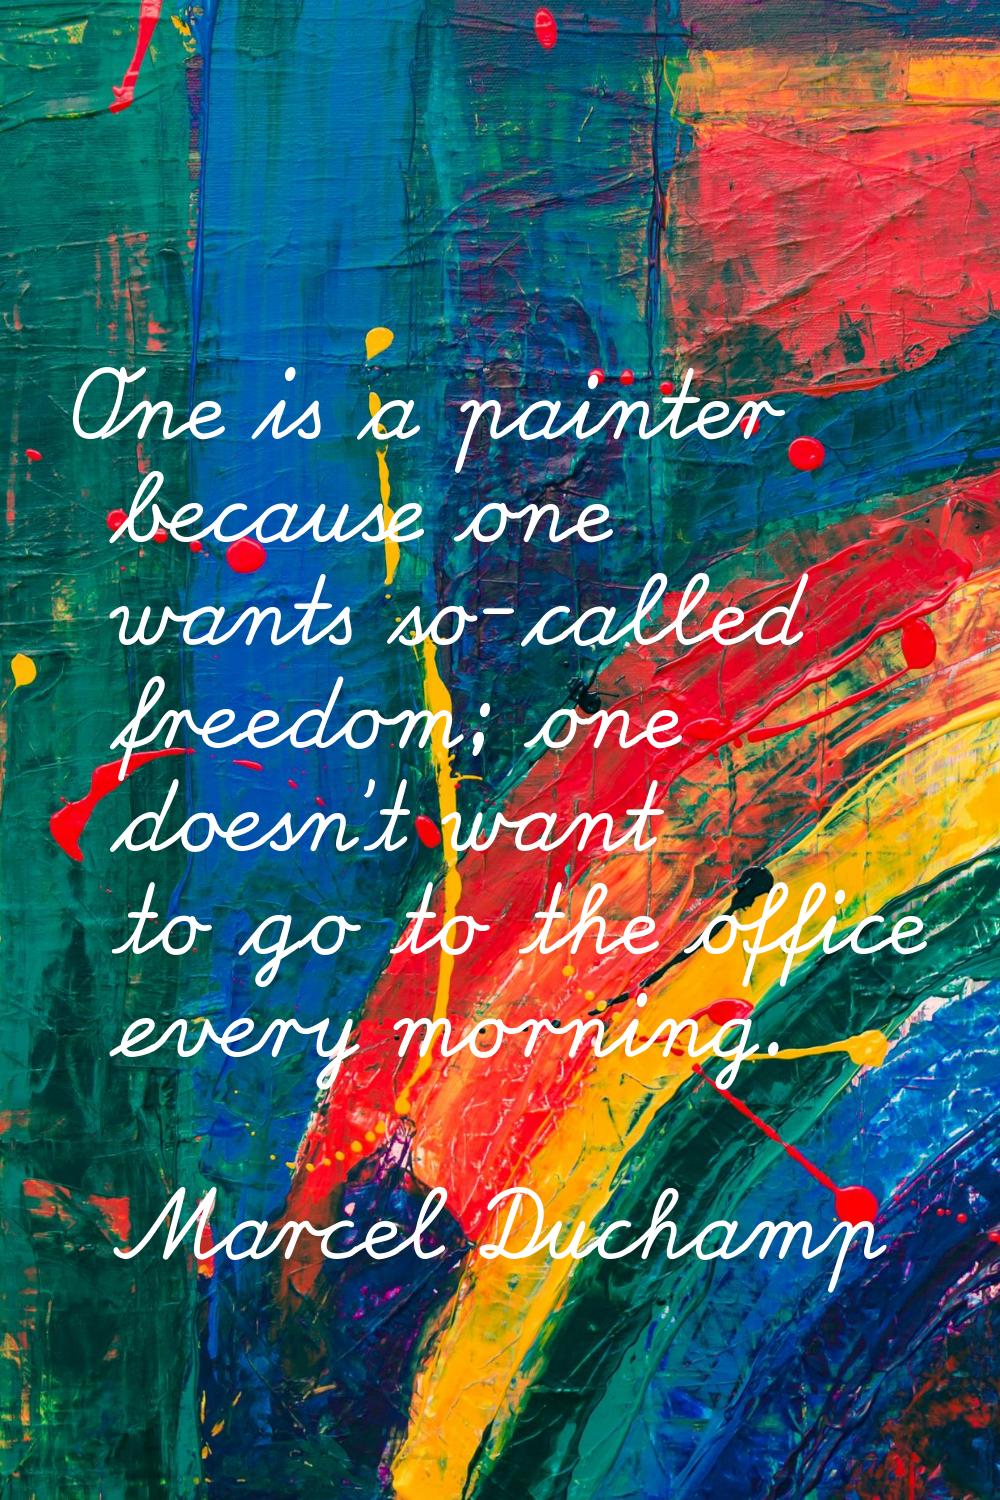 One is a painter because one wants so-called freedom; one doesn't want to go to the office every mo